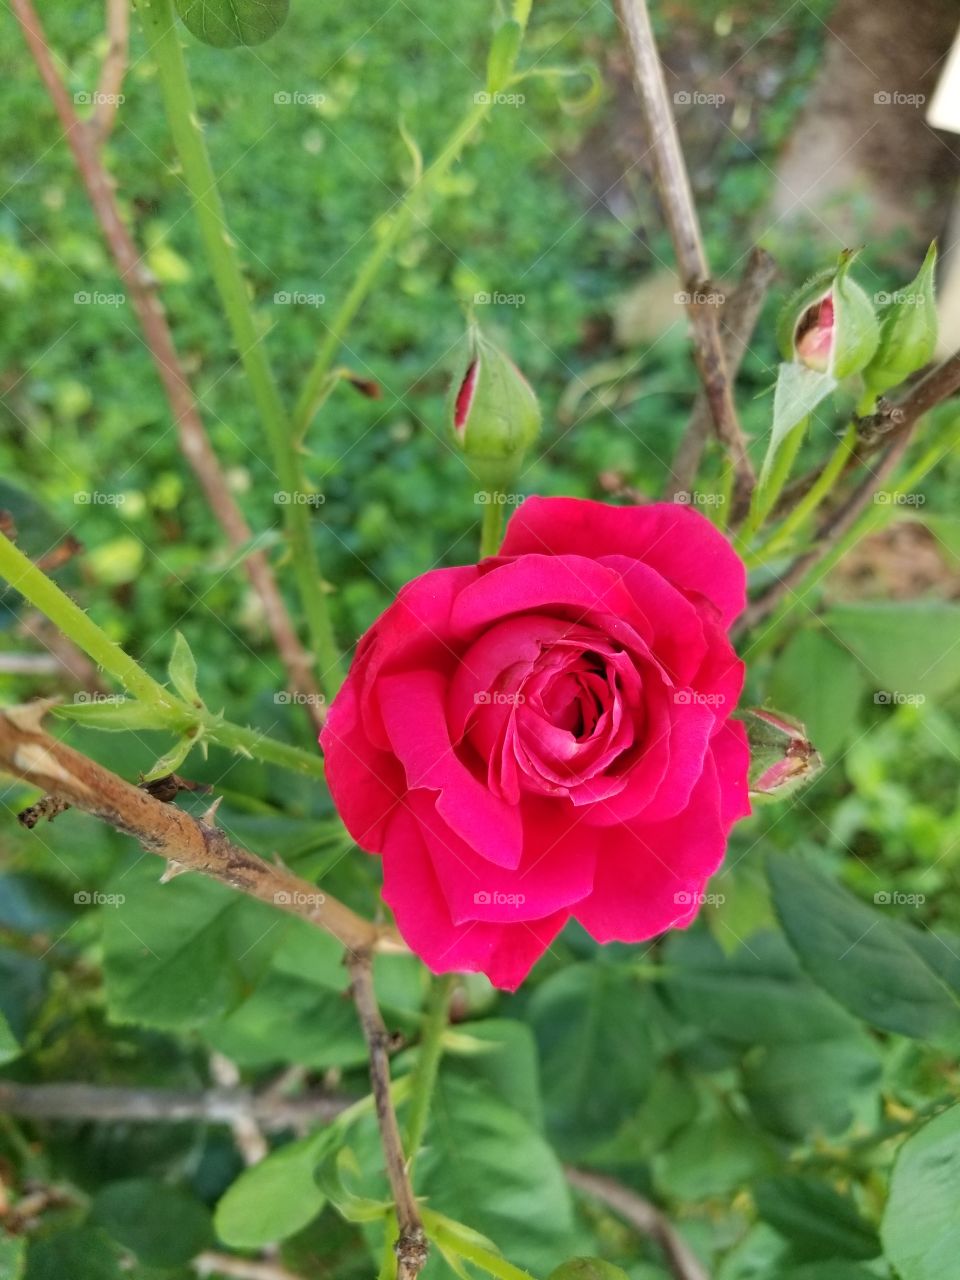 Beautiful rose around the house. No filters needed. All natural.